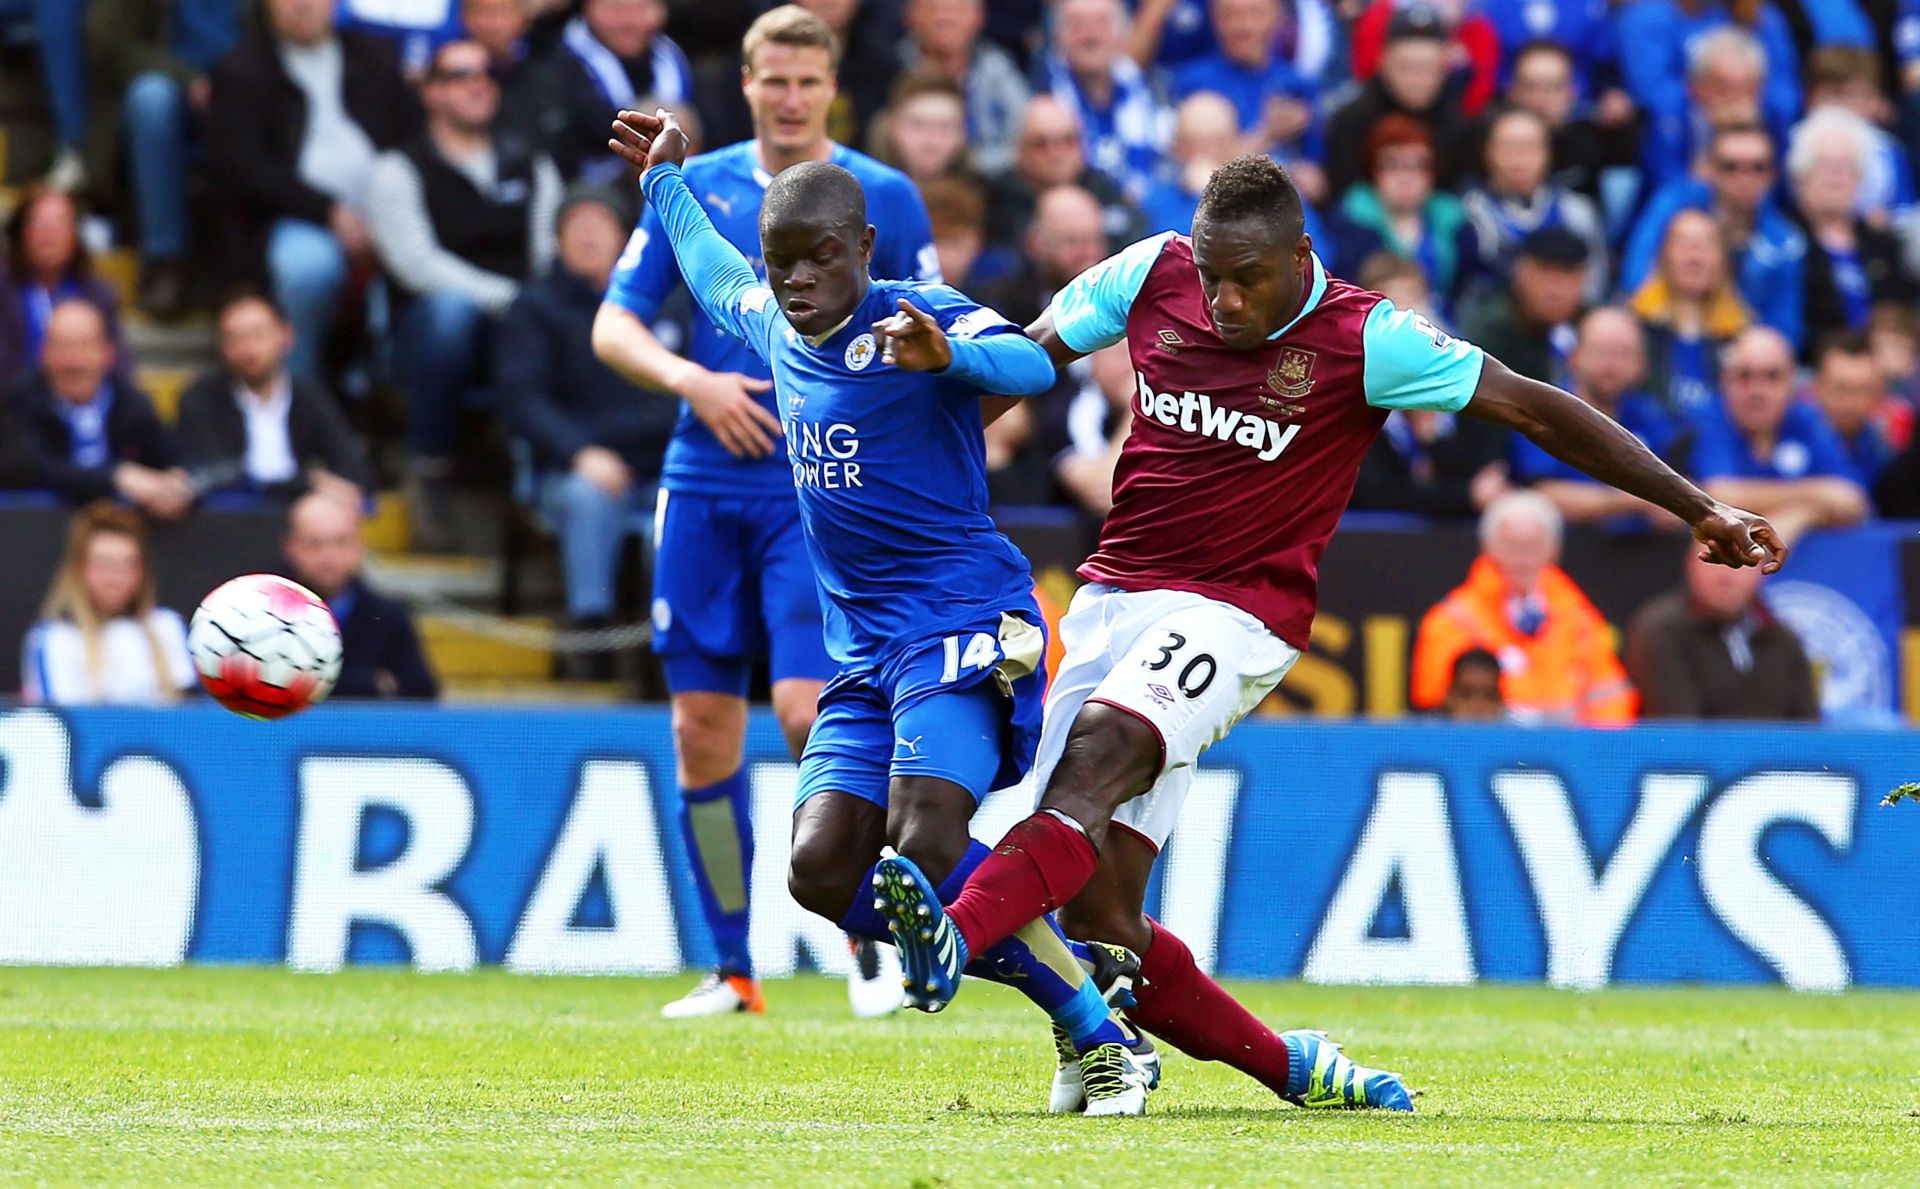 epa05263729 Leicester City's Ngolo Kante (L) in action against West Ham United's Michail Antonio (R) during the English Premier League soccer match between Leicester City and West Ham United at The King Power Stadium in Leicester, Britain, 17 April 2016.  EPA/TIM KEETON EDITORIAL USE ONLY. No use with unauthorized audio, video, data, fixture lists, club/league logos or 'live' services. Online in-match use limited to 75 images, no video emulation. No use in betting, games or single club/league/player publications.